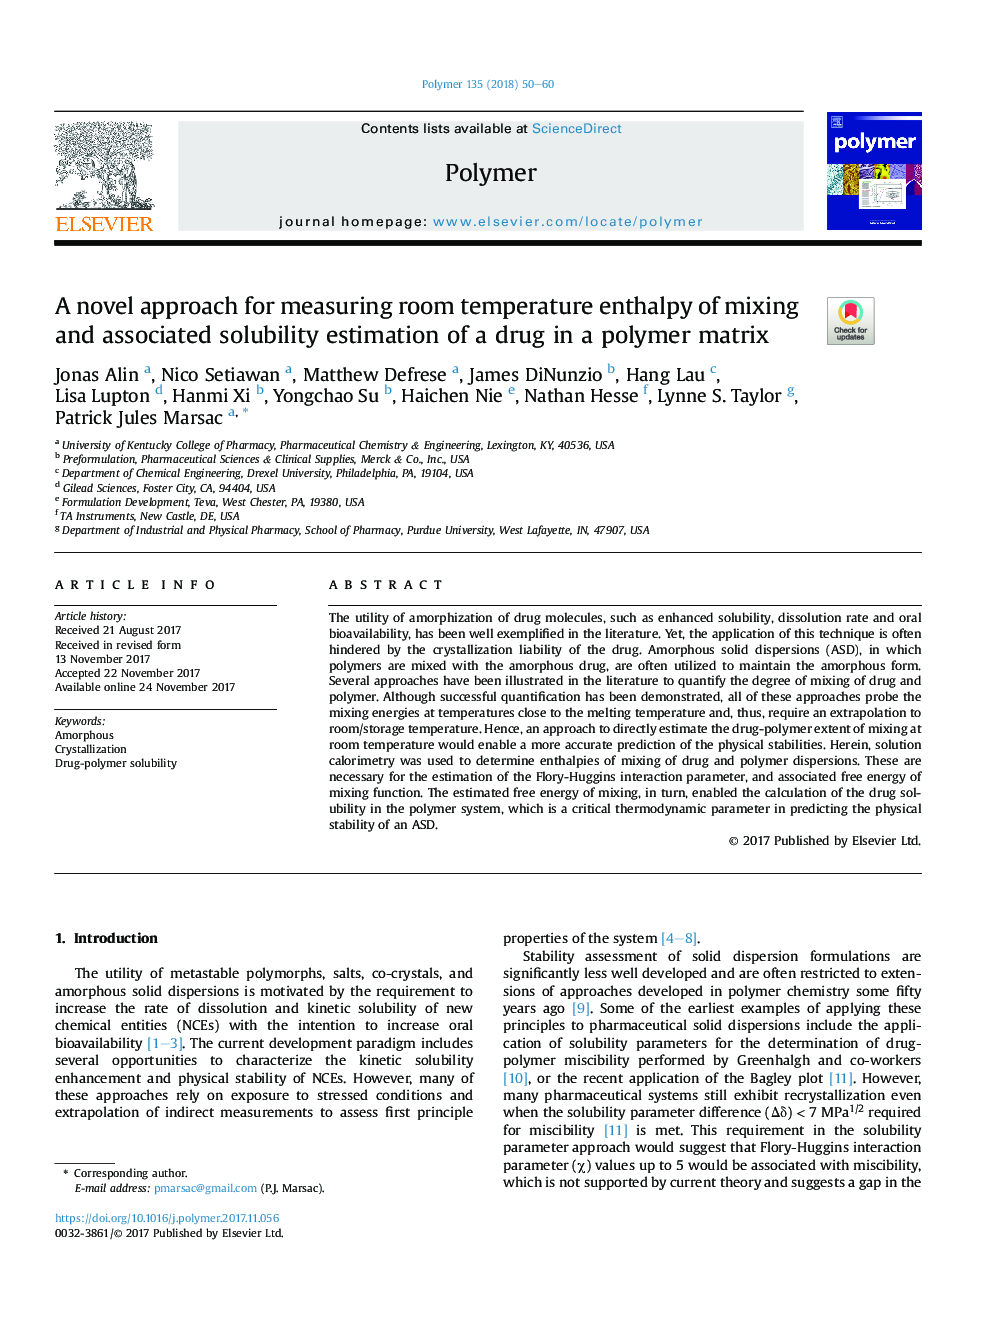 A novel approach for measuring room temperature enthalpy of mixing and associated solubility estimation of a drug in a polymer matrix